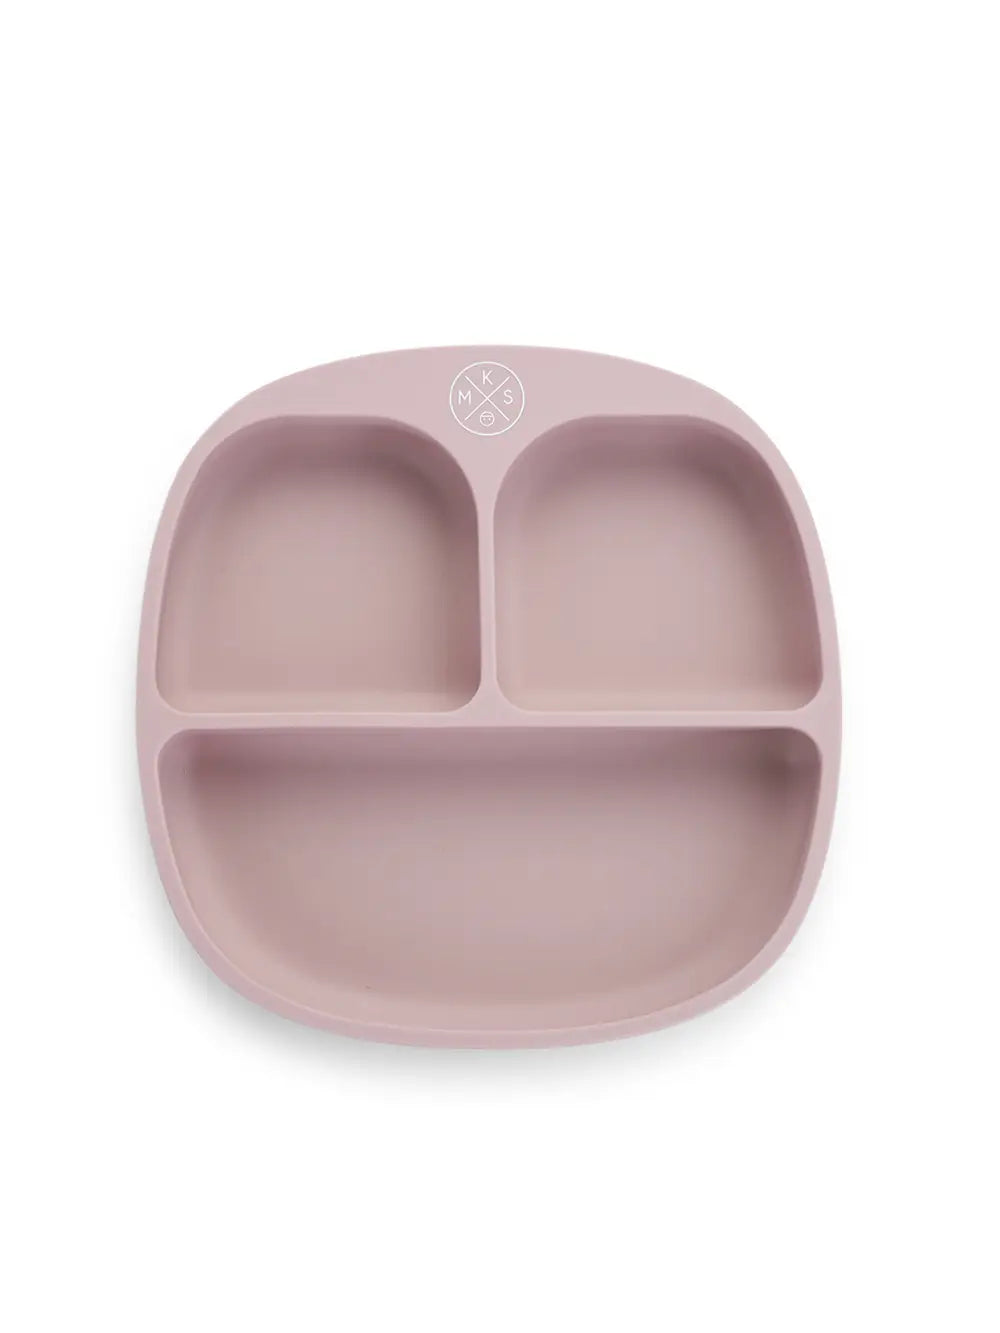 Silicone Suction Kids Plate w/ Dividing Sections